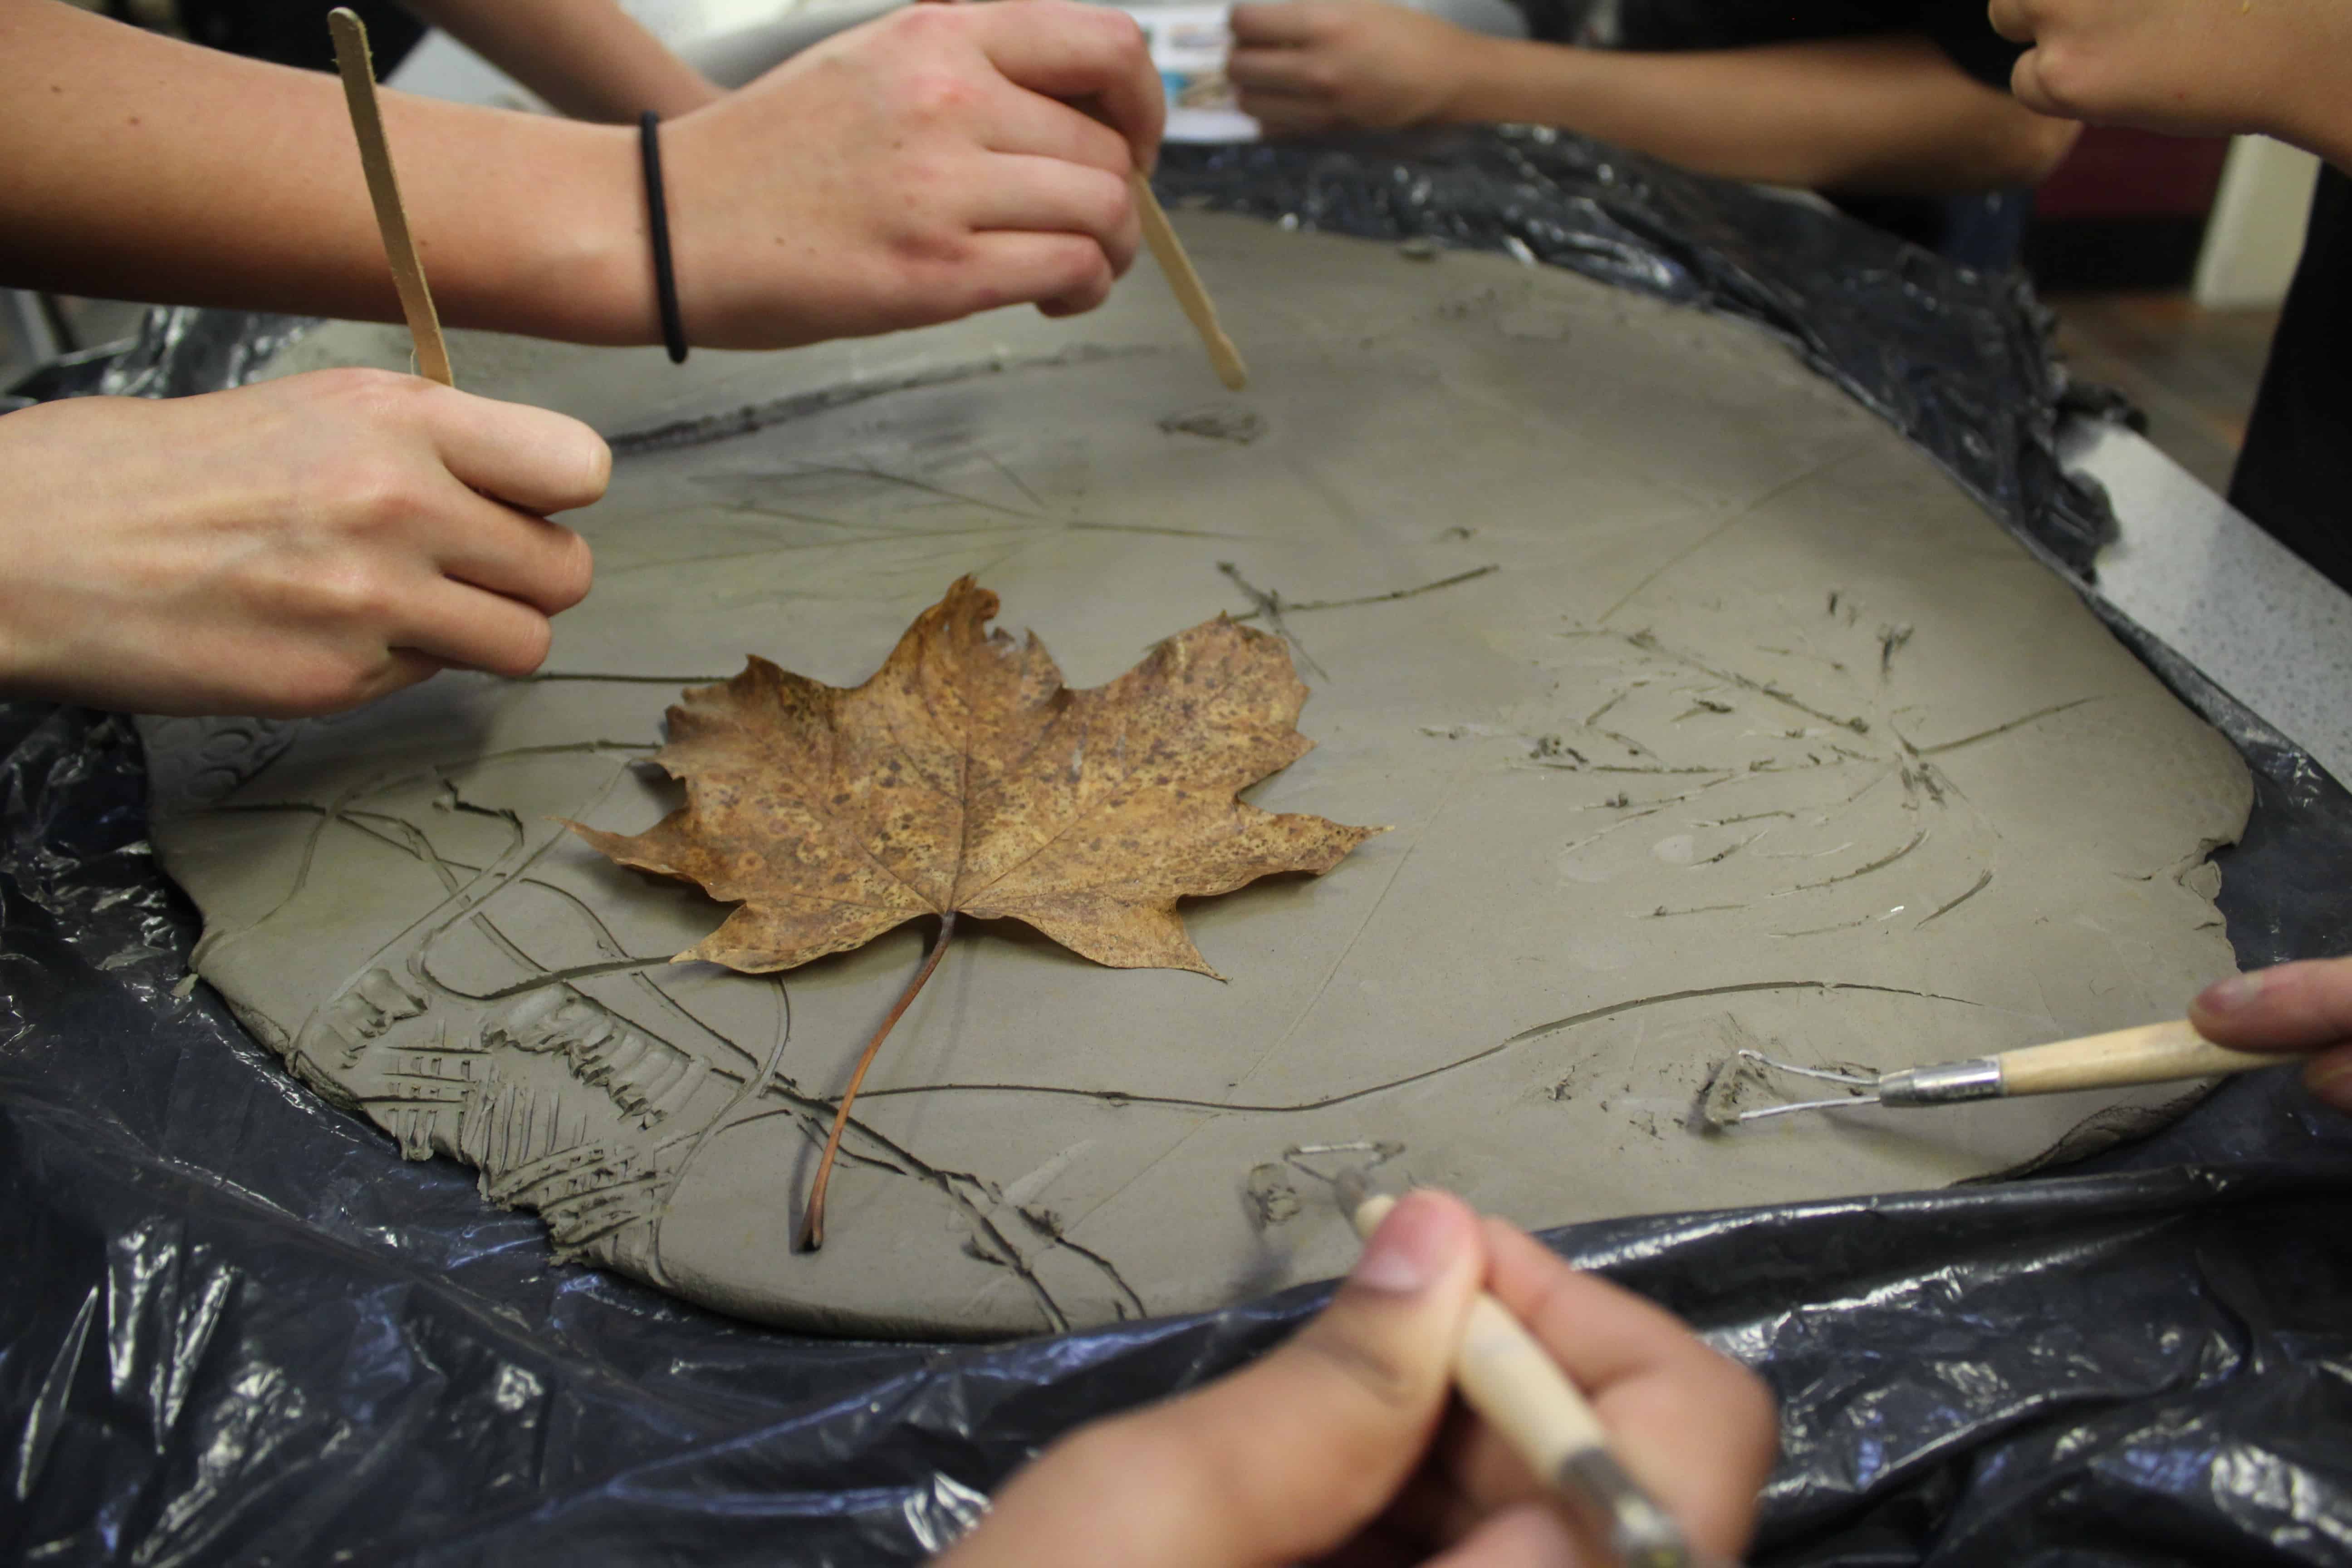 Students from Cheadle Hume High School use tools and a leaf to create their clay tiles in a collaborative clay workshop for the Big Draw 2023.